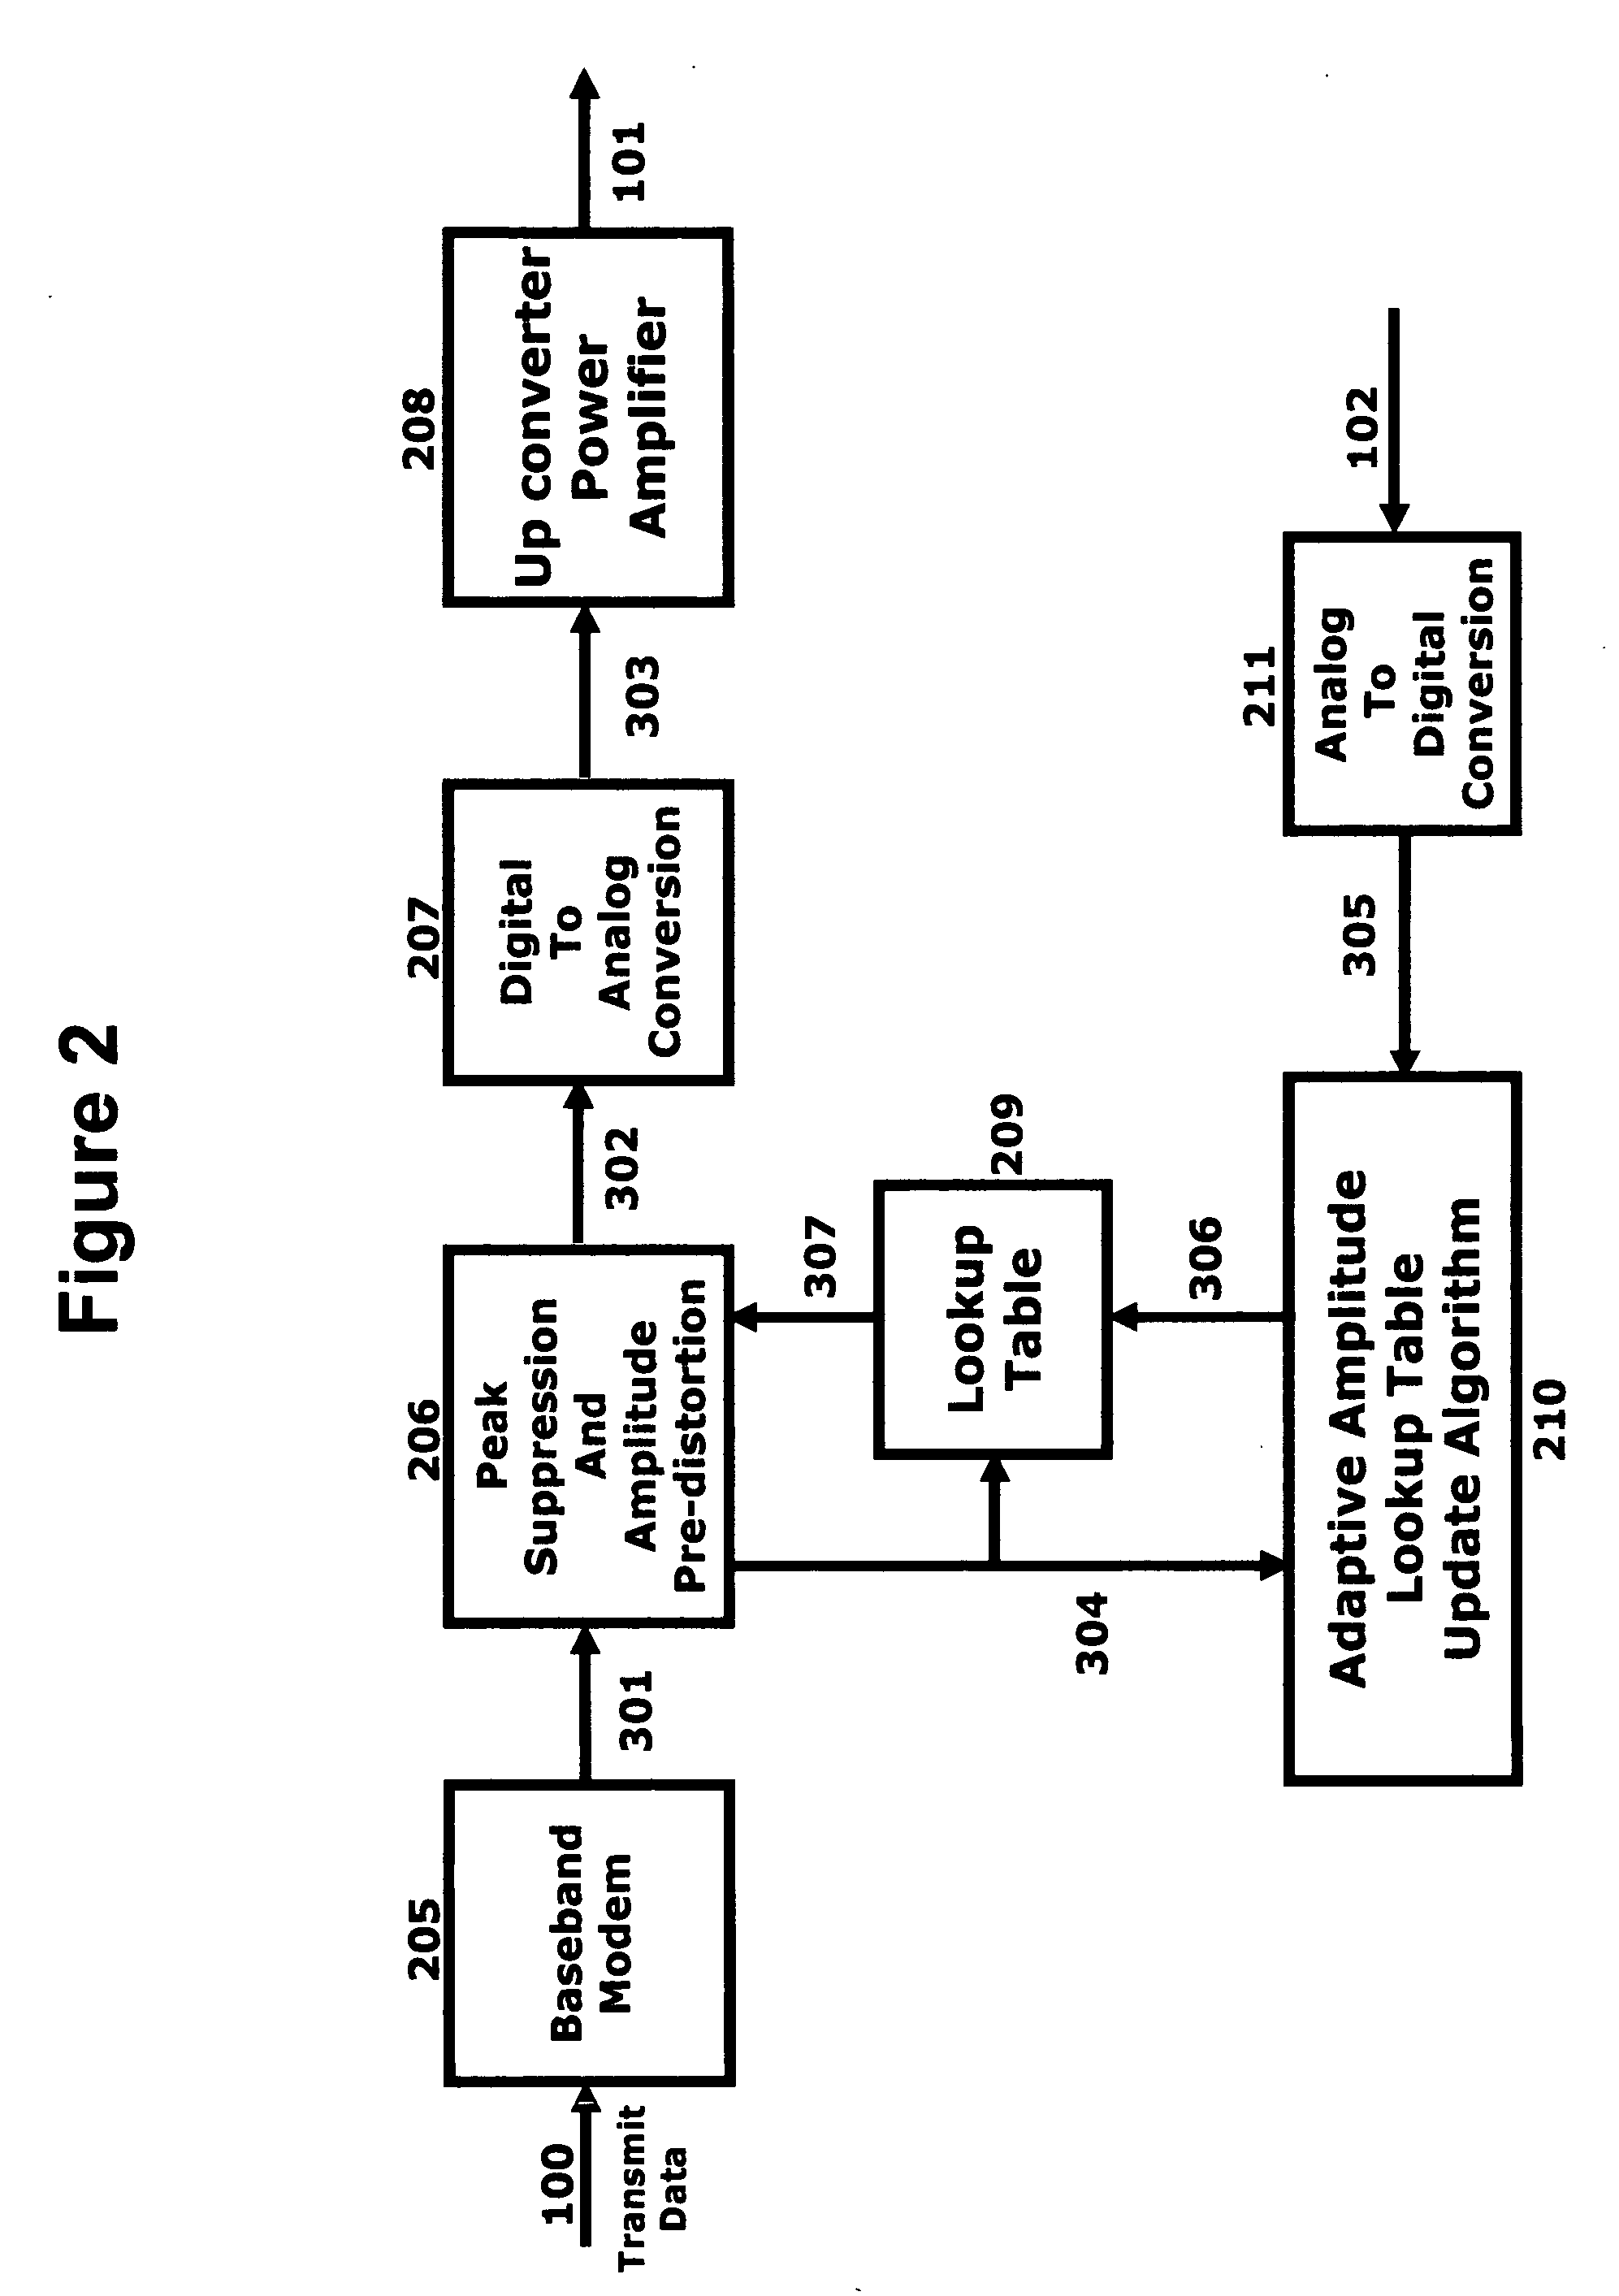 Power booster using peak suppression and pre-distortion for terminal radios